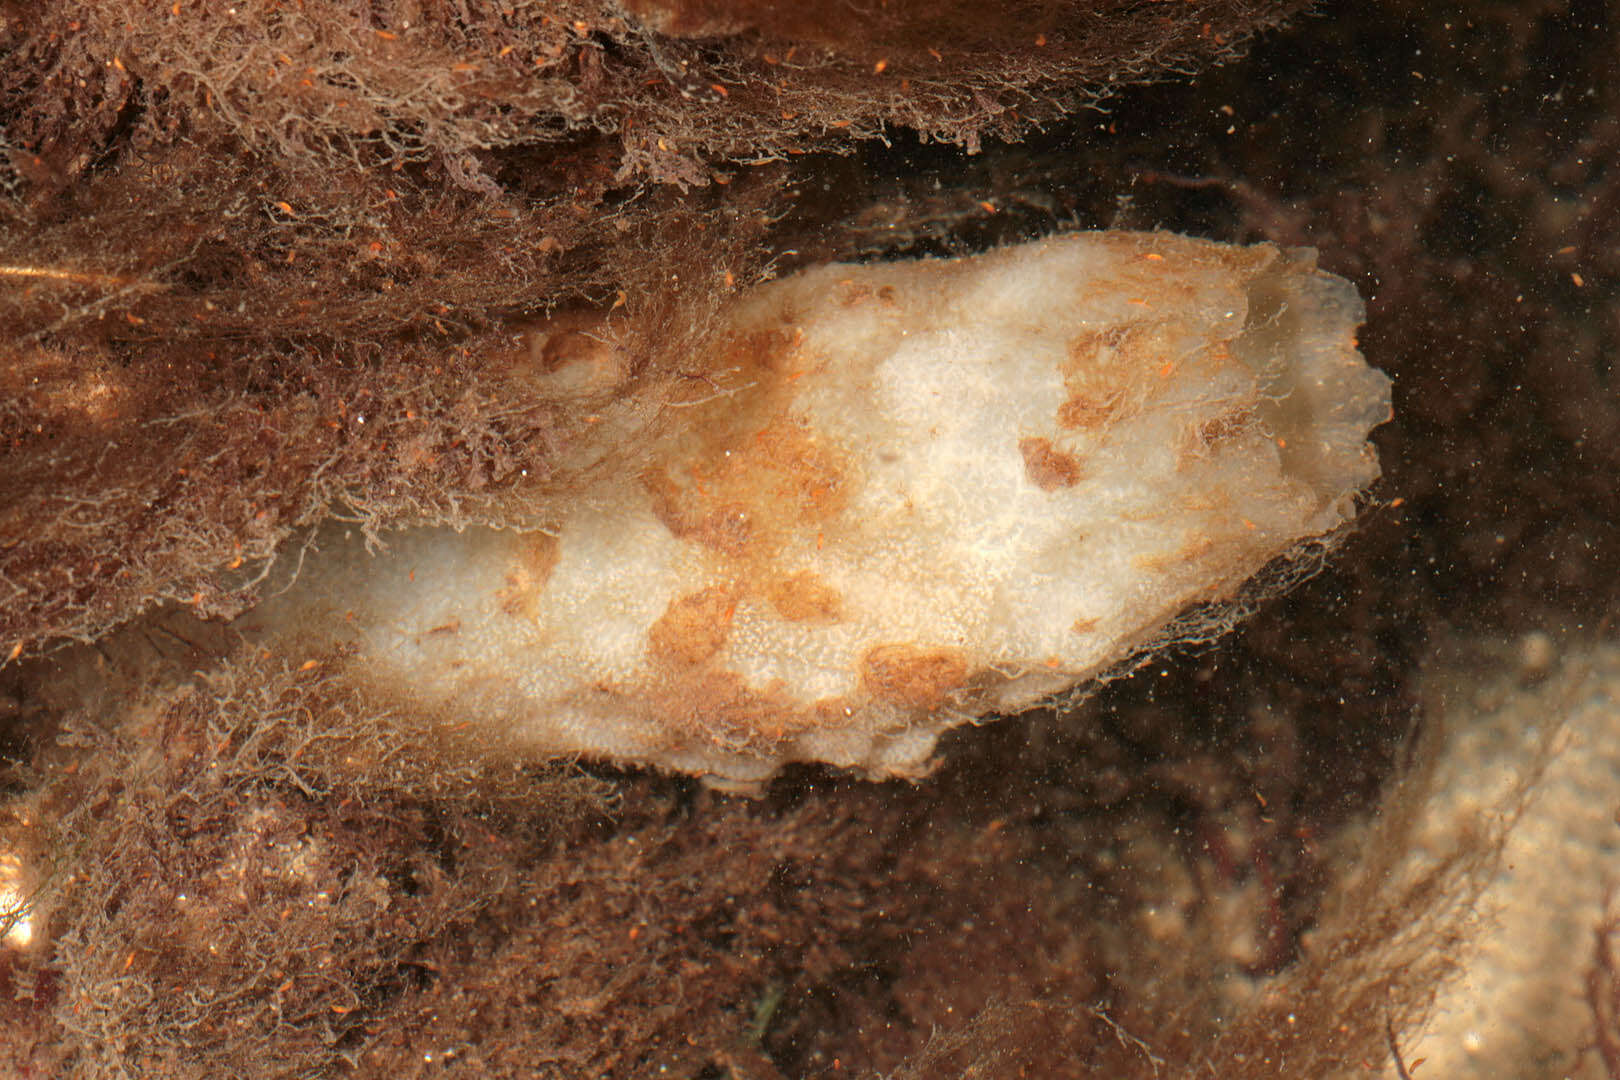 Image of white sea-squirt